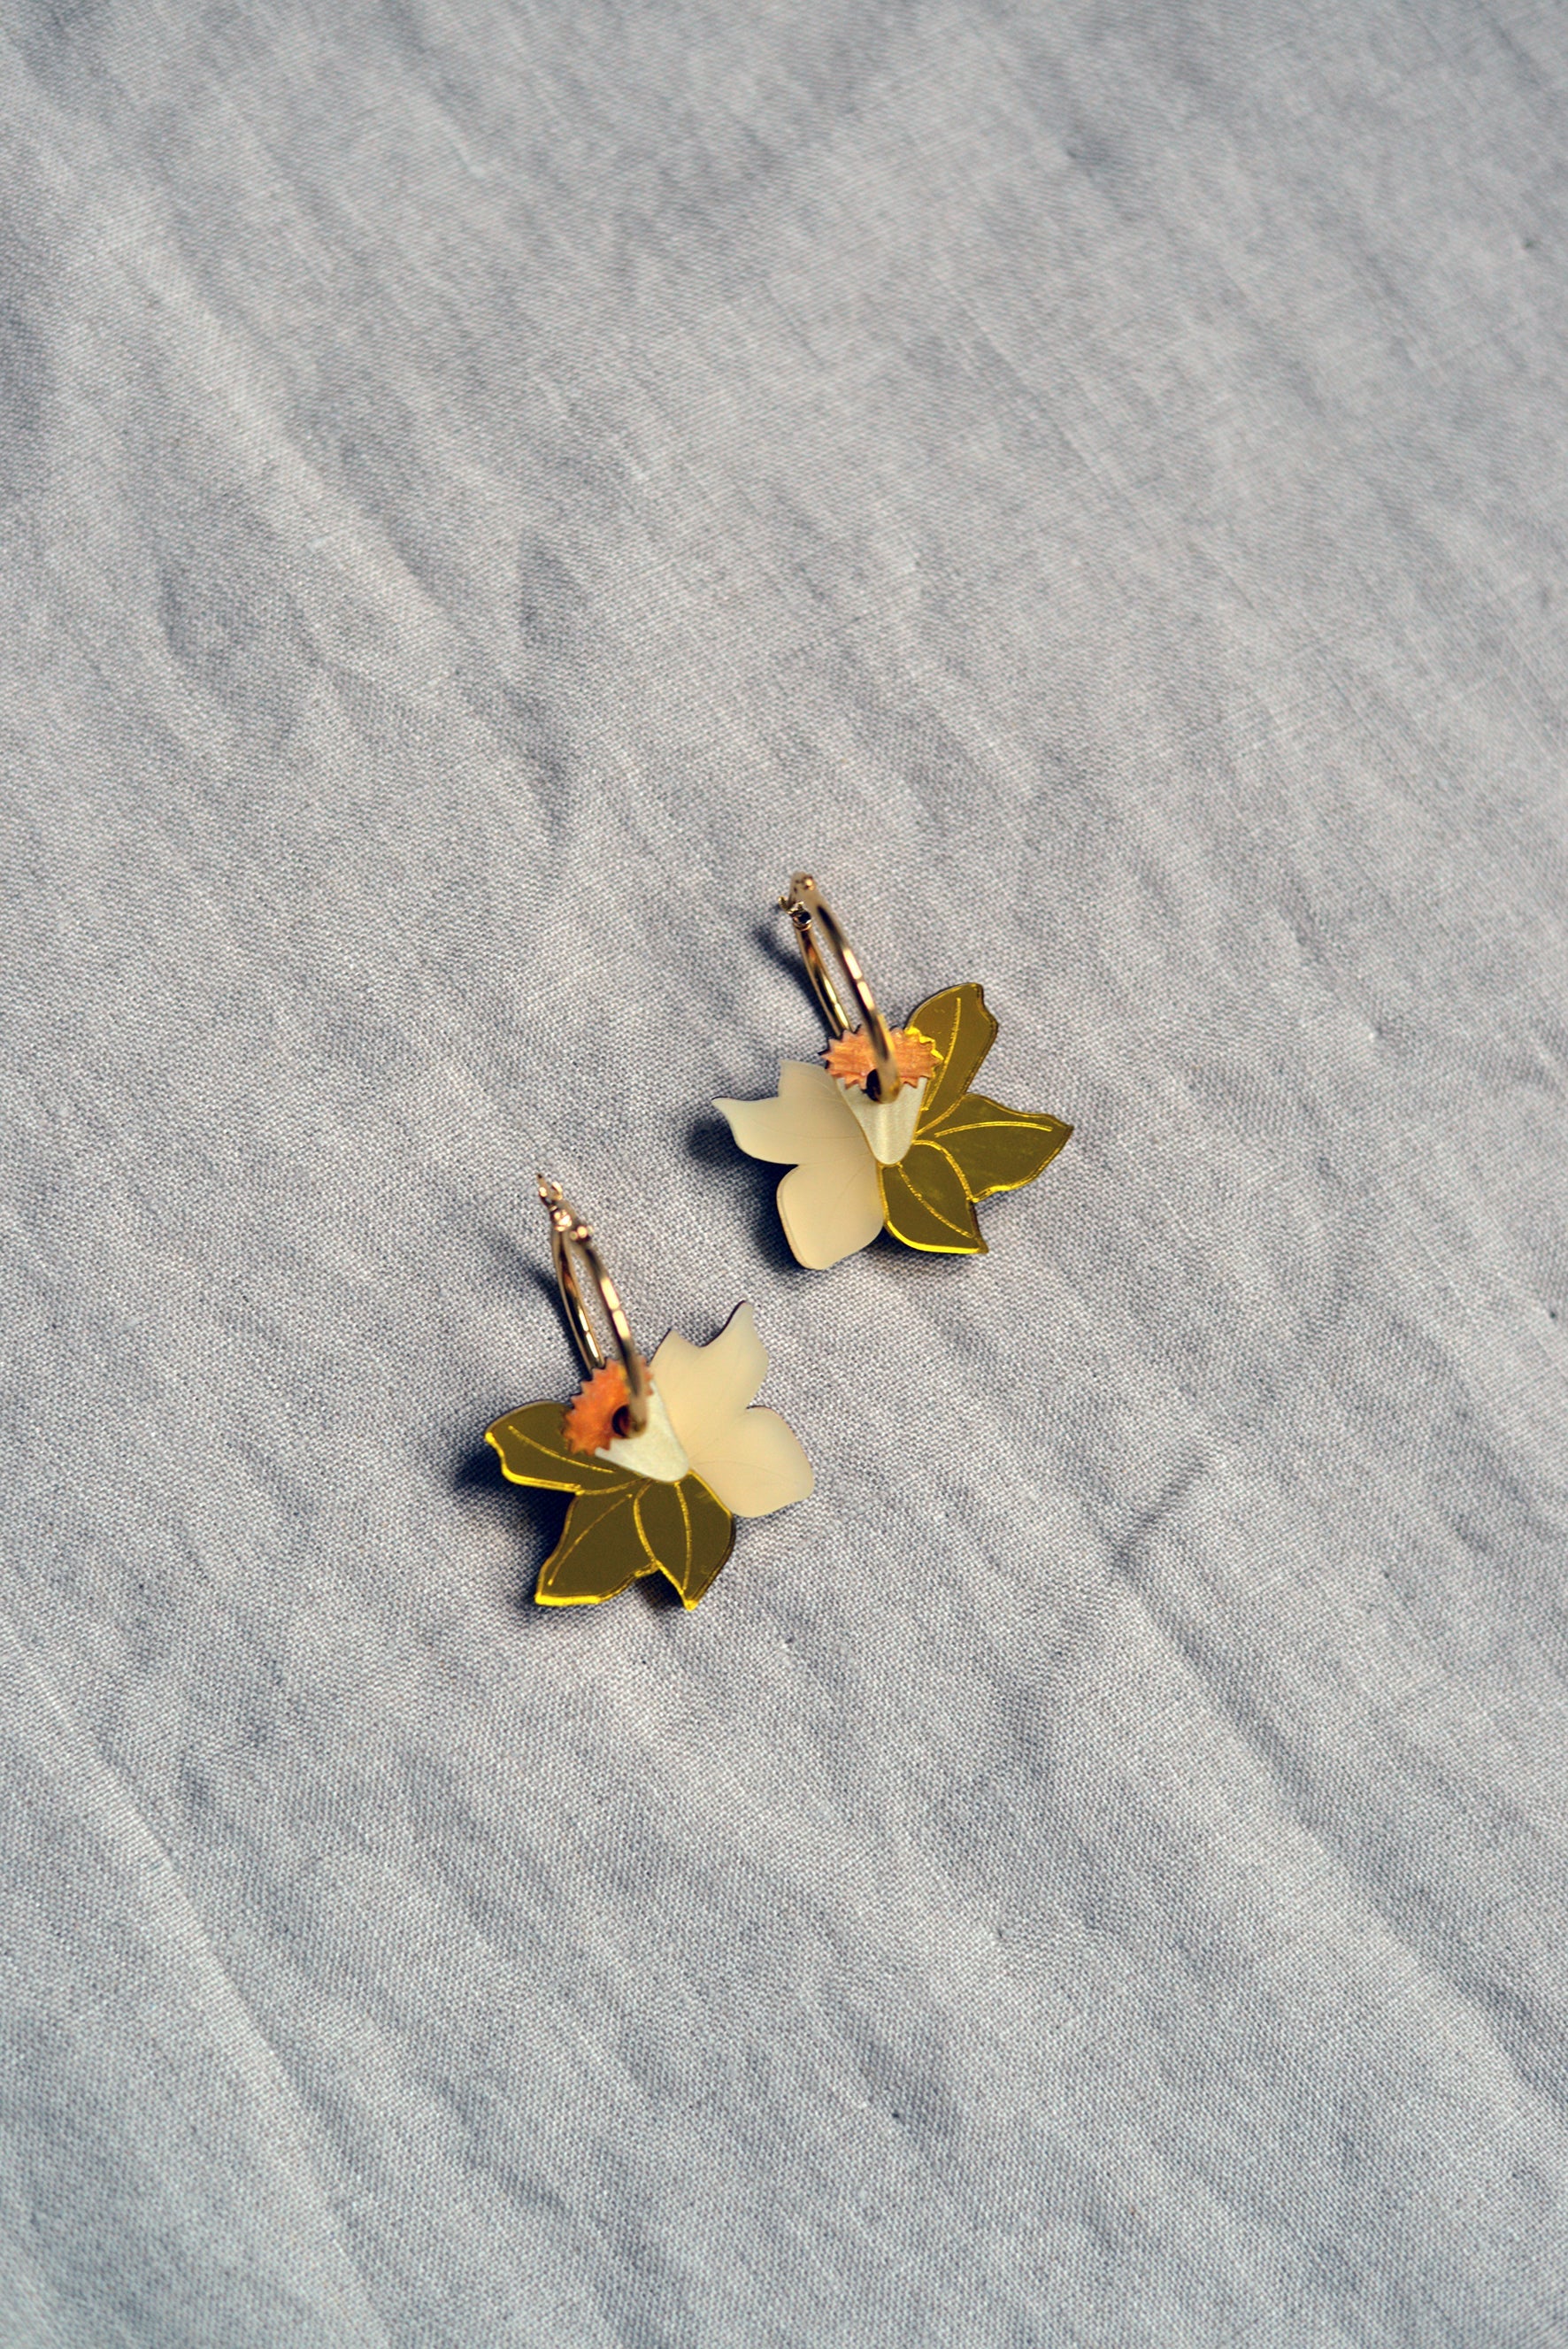 Daffodil Earring Workshop- Wed 20th March 6-8.30pm @ Teacups & Cupcakes